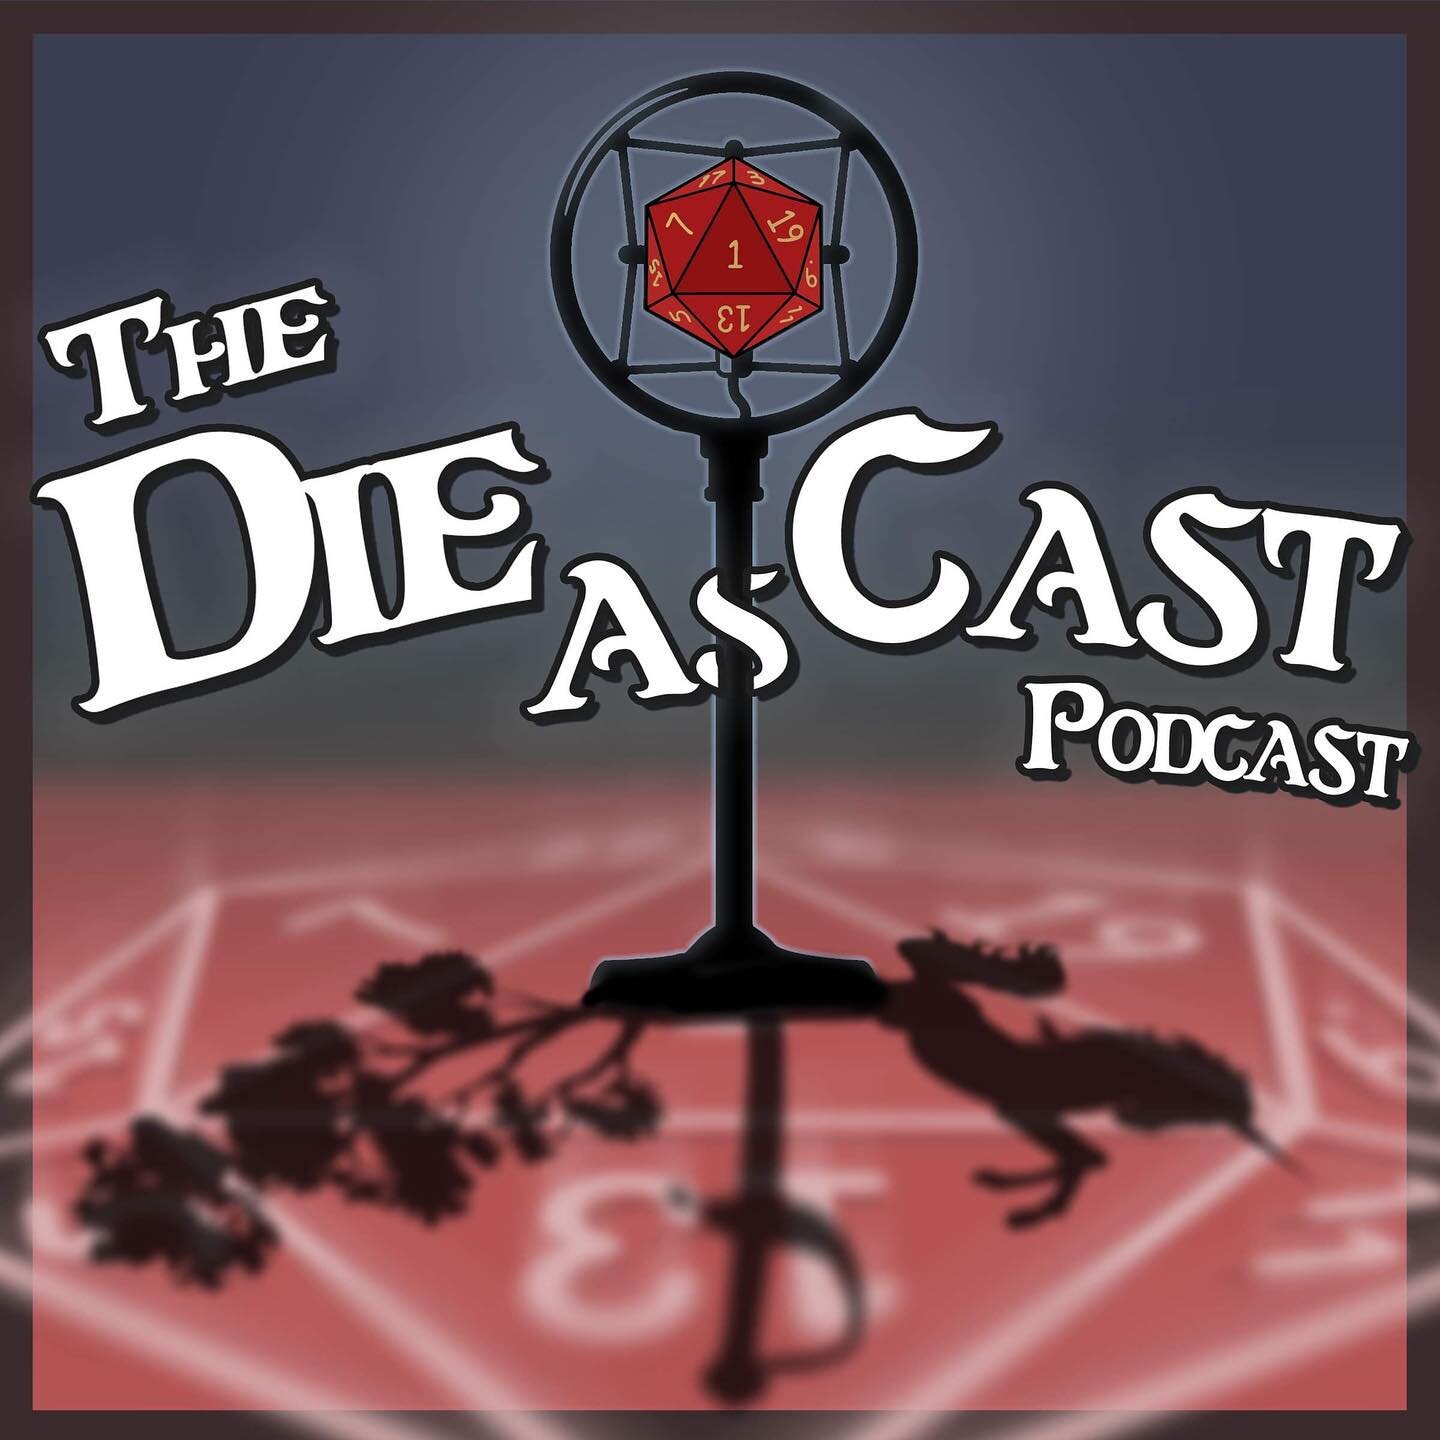 Hey folks! If you have some time this afternoon, you can catch @madelinehuntersmith @kevincork and myself on the @koboldpress @twitch channel chatting about our new @dndwizards podcast with @diegostredel - #TheDieAsCast